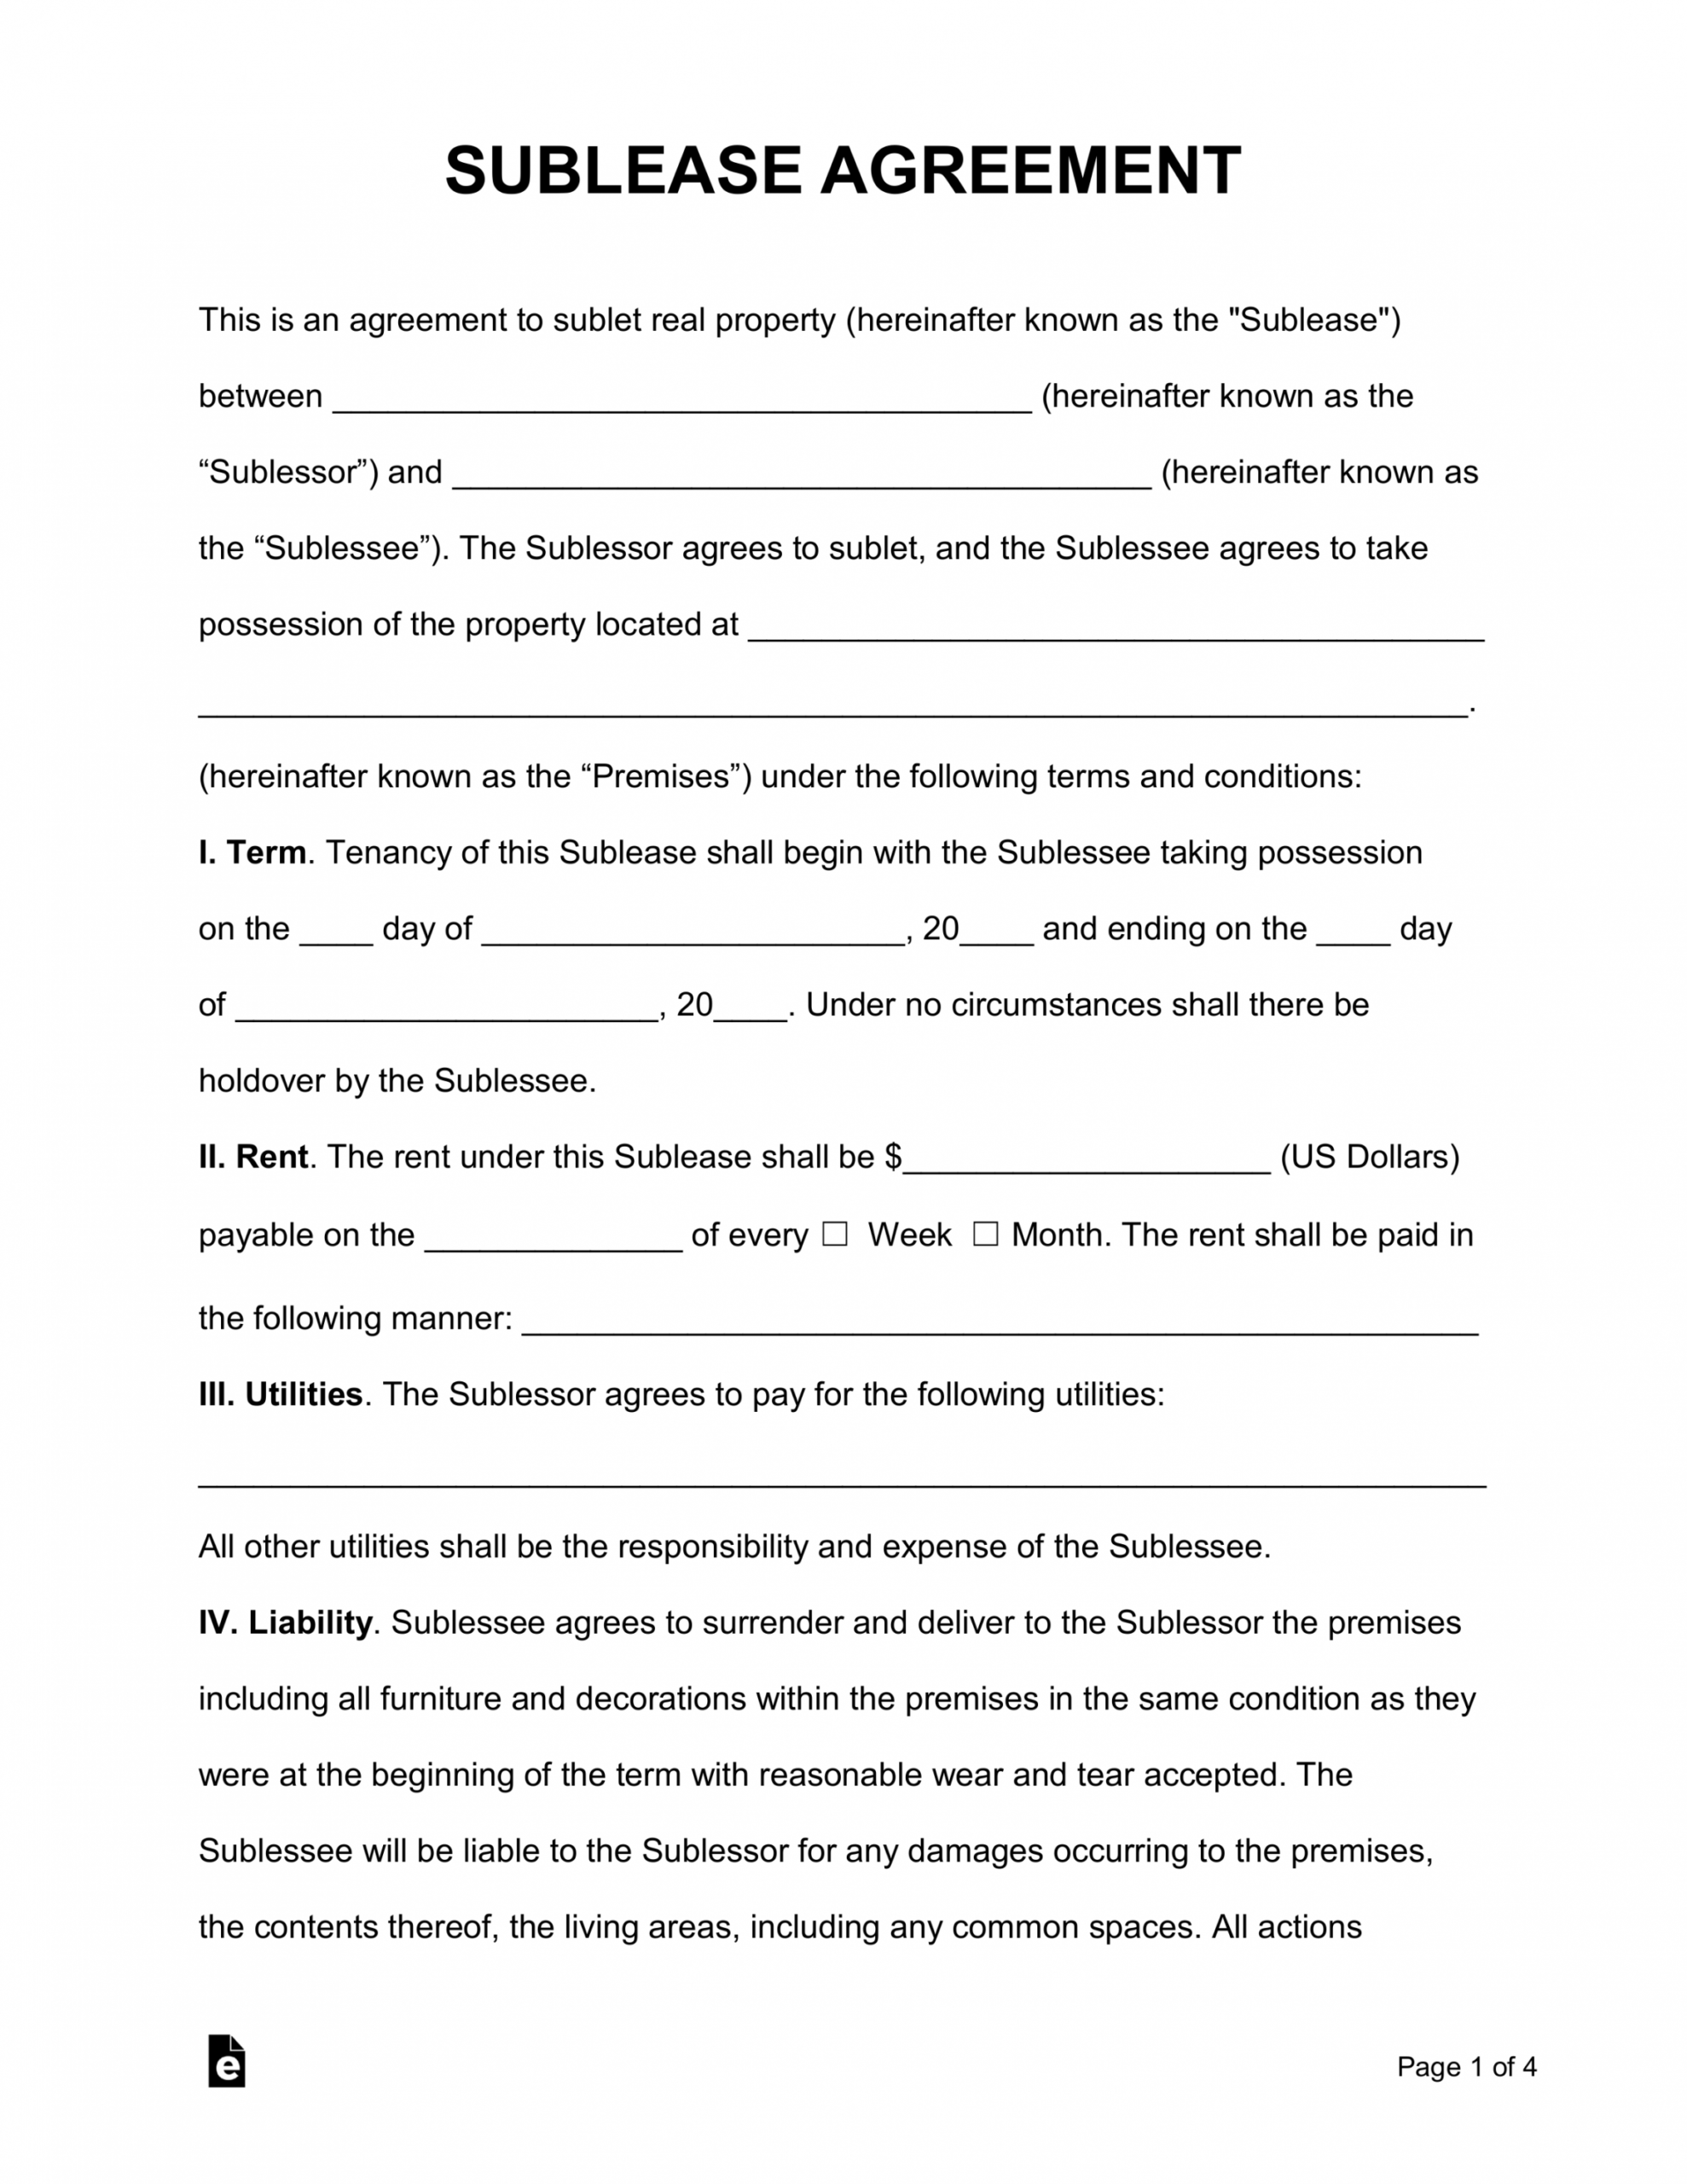 free sublease agreement template  pdf  word  eforms room sublease agreement template pdf